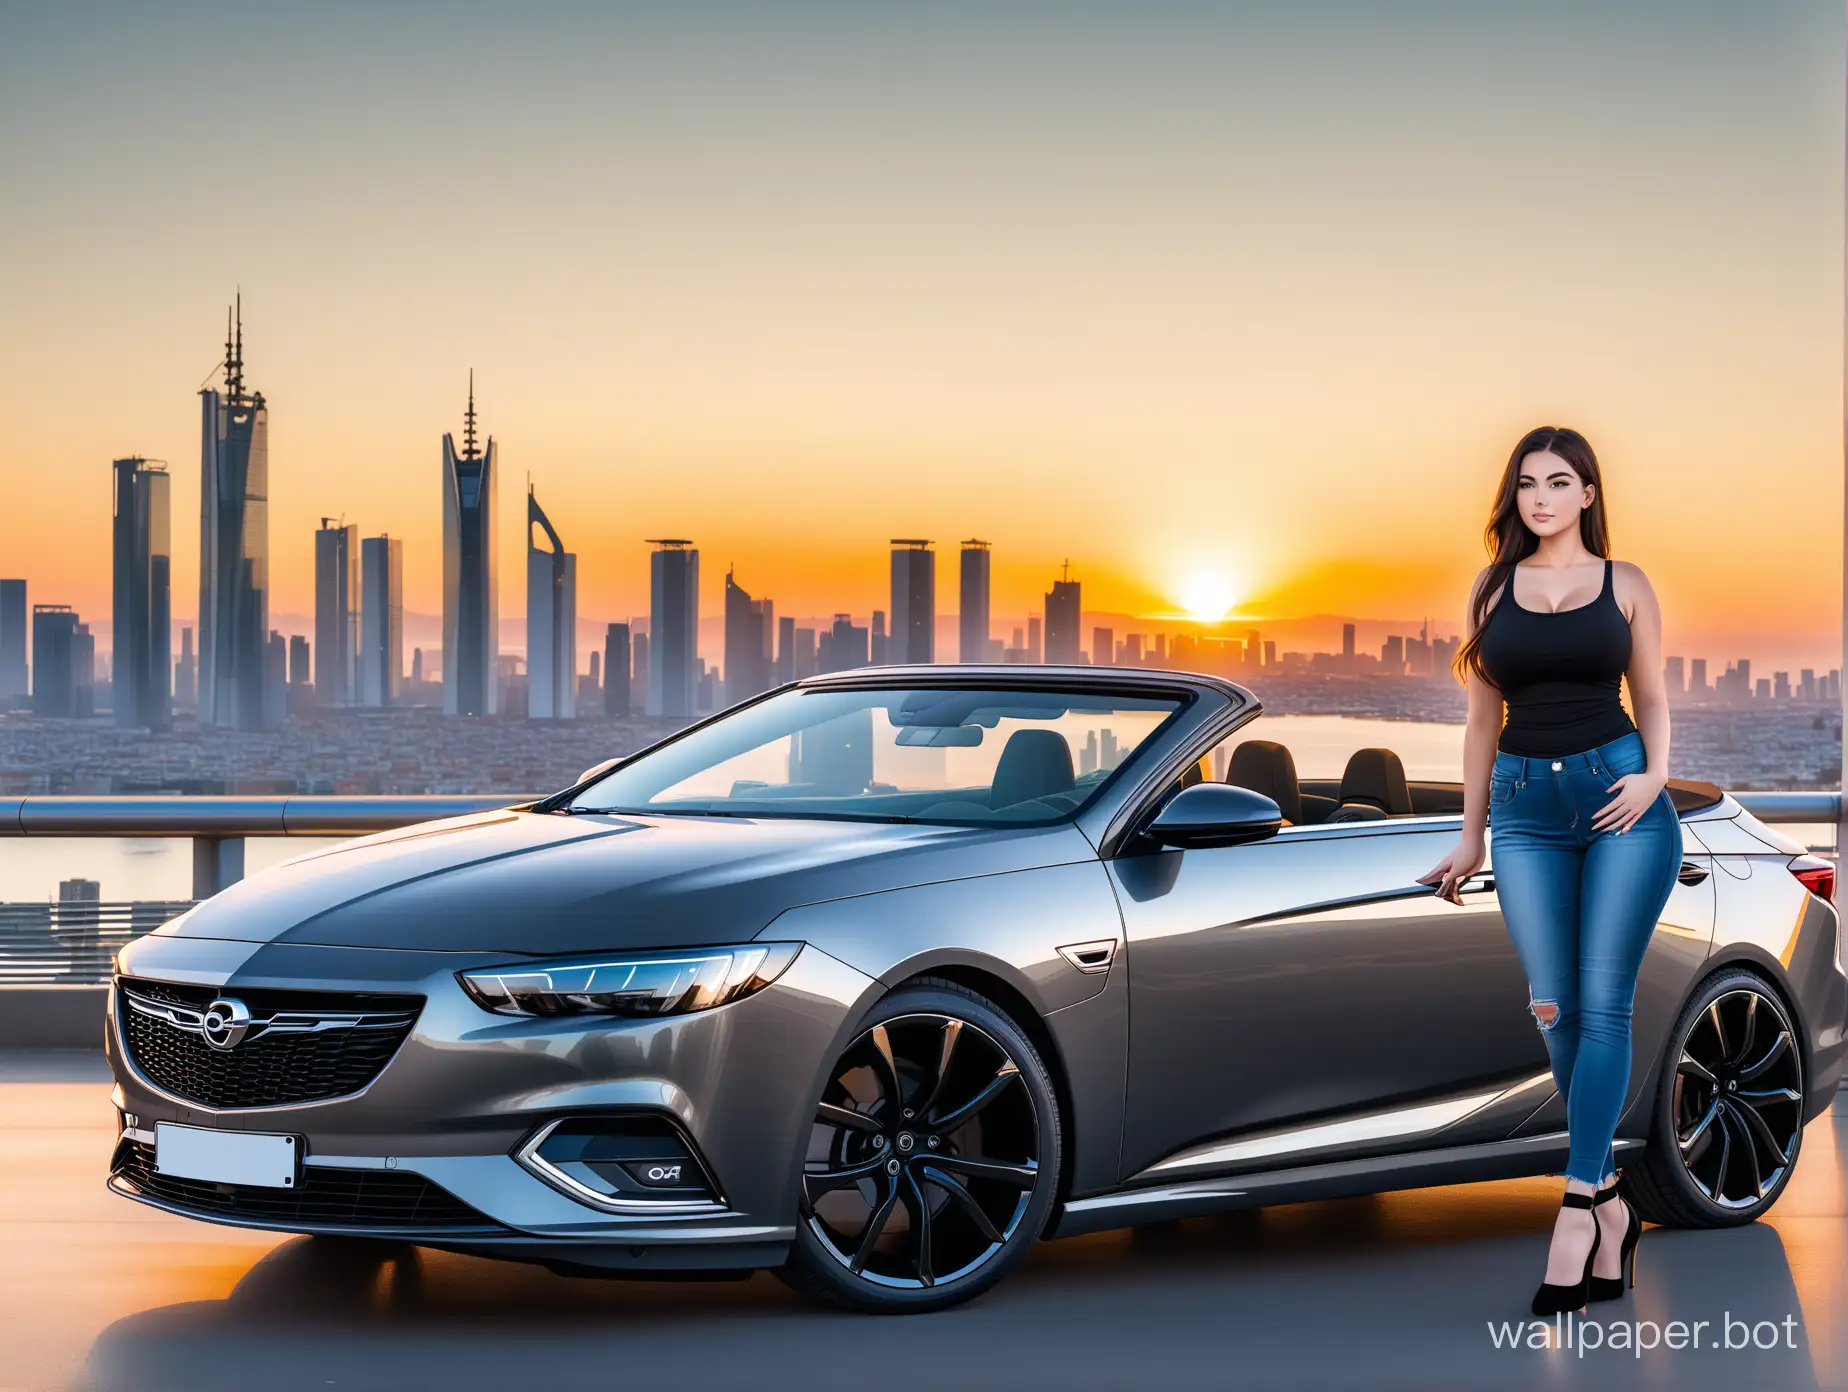 Brunette-Woman-with-Grey-Convertible-Car-in-a-Futuristic-City-at-Sundown